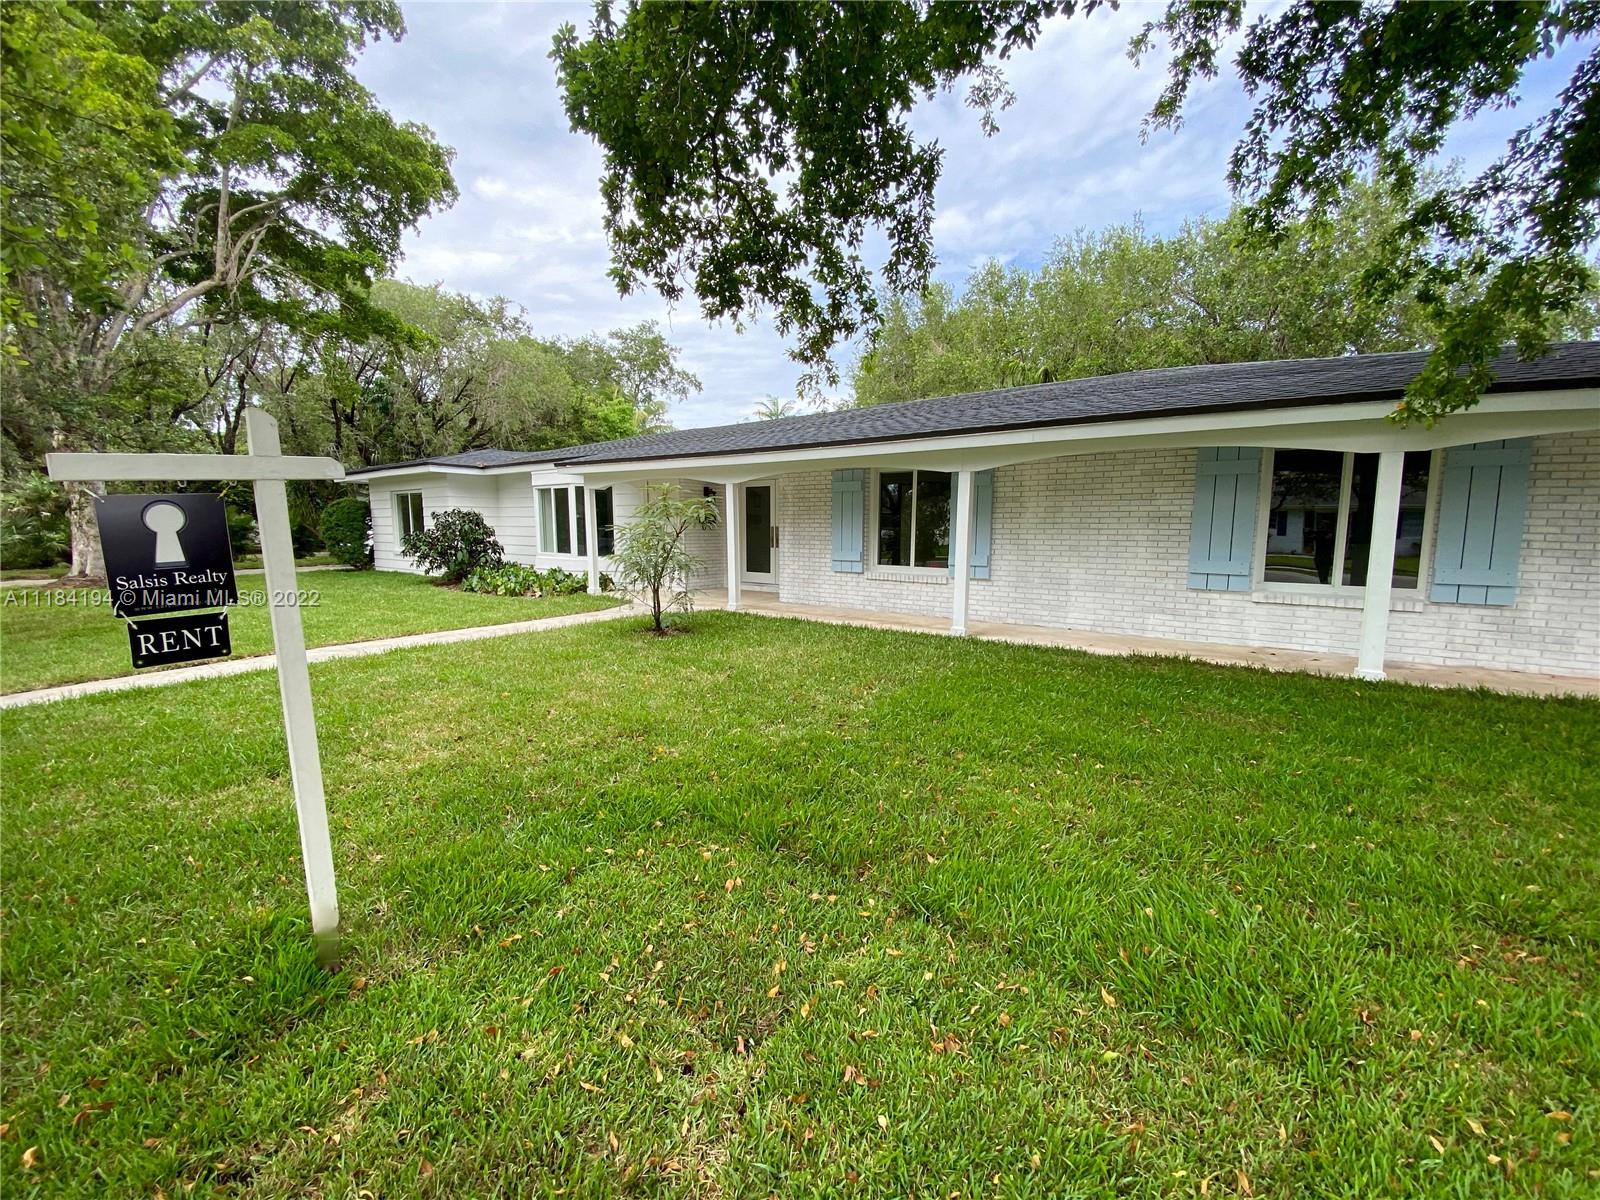 Fully renovated half duplex in Pinecrest.  Be the first to enjoy this newly remodeled home.  Modern, updated kitchens and baths, impact windows/doors, attached two car garage, inside laundry, open floor plan, private backyard with covered patio area.